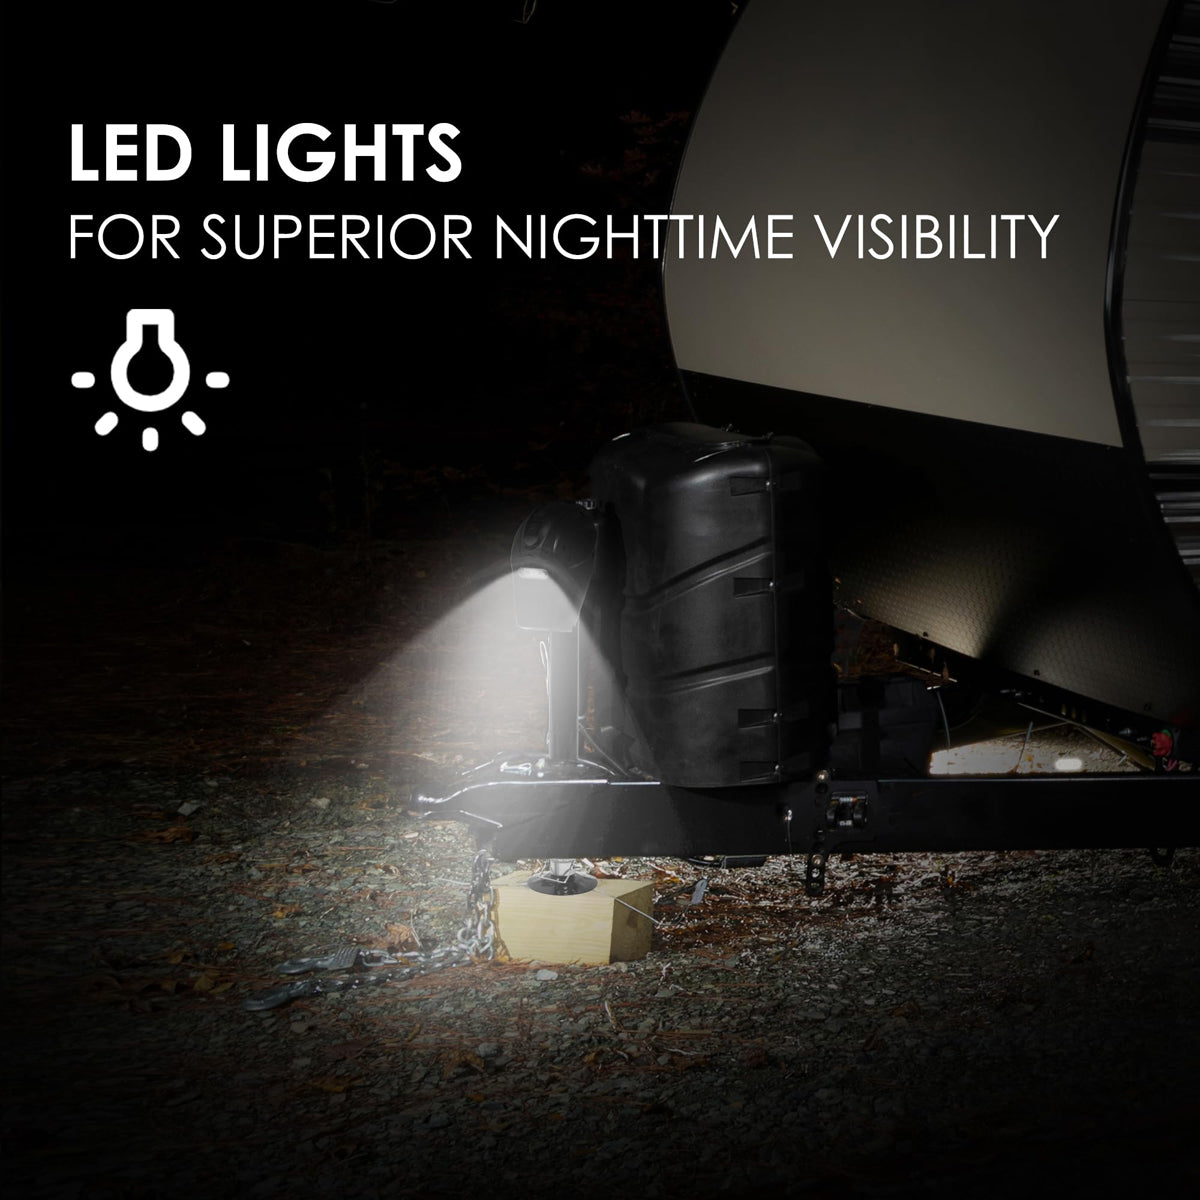 LED Lights For Superior Nighttime Visibility